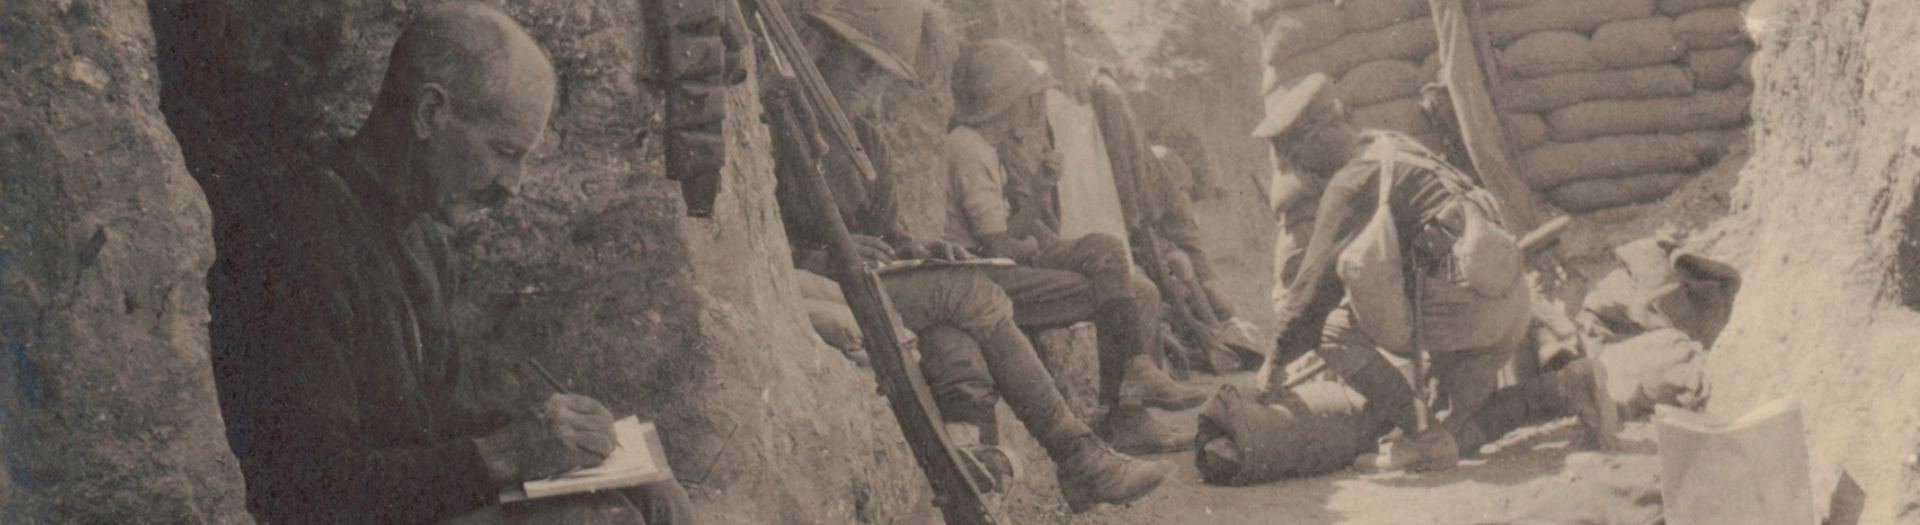 Sepia toned photo of soldiers sitting in a trench writing letters